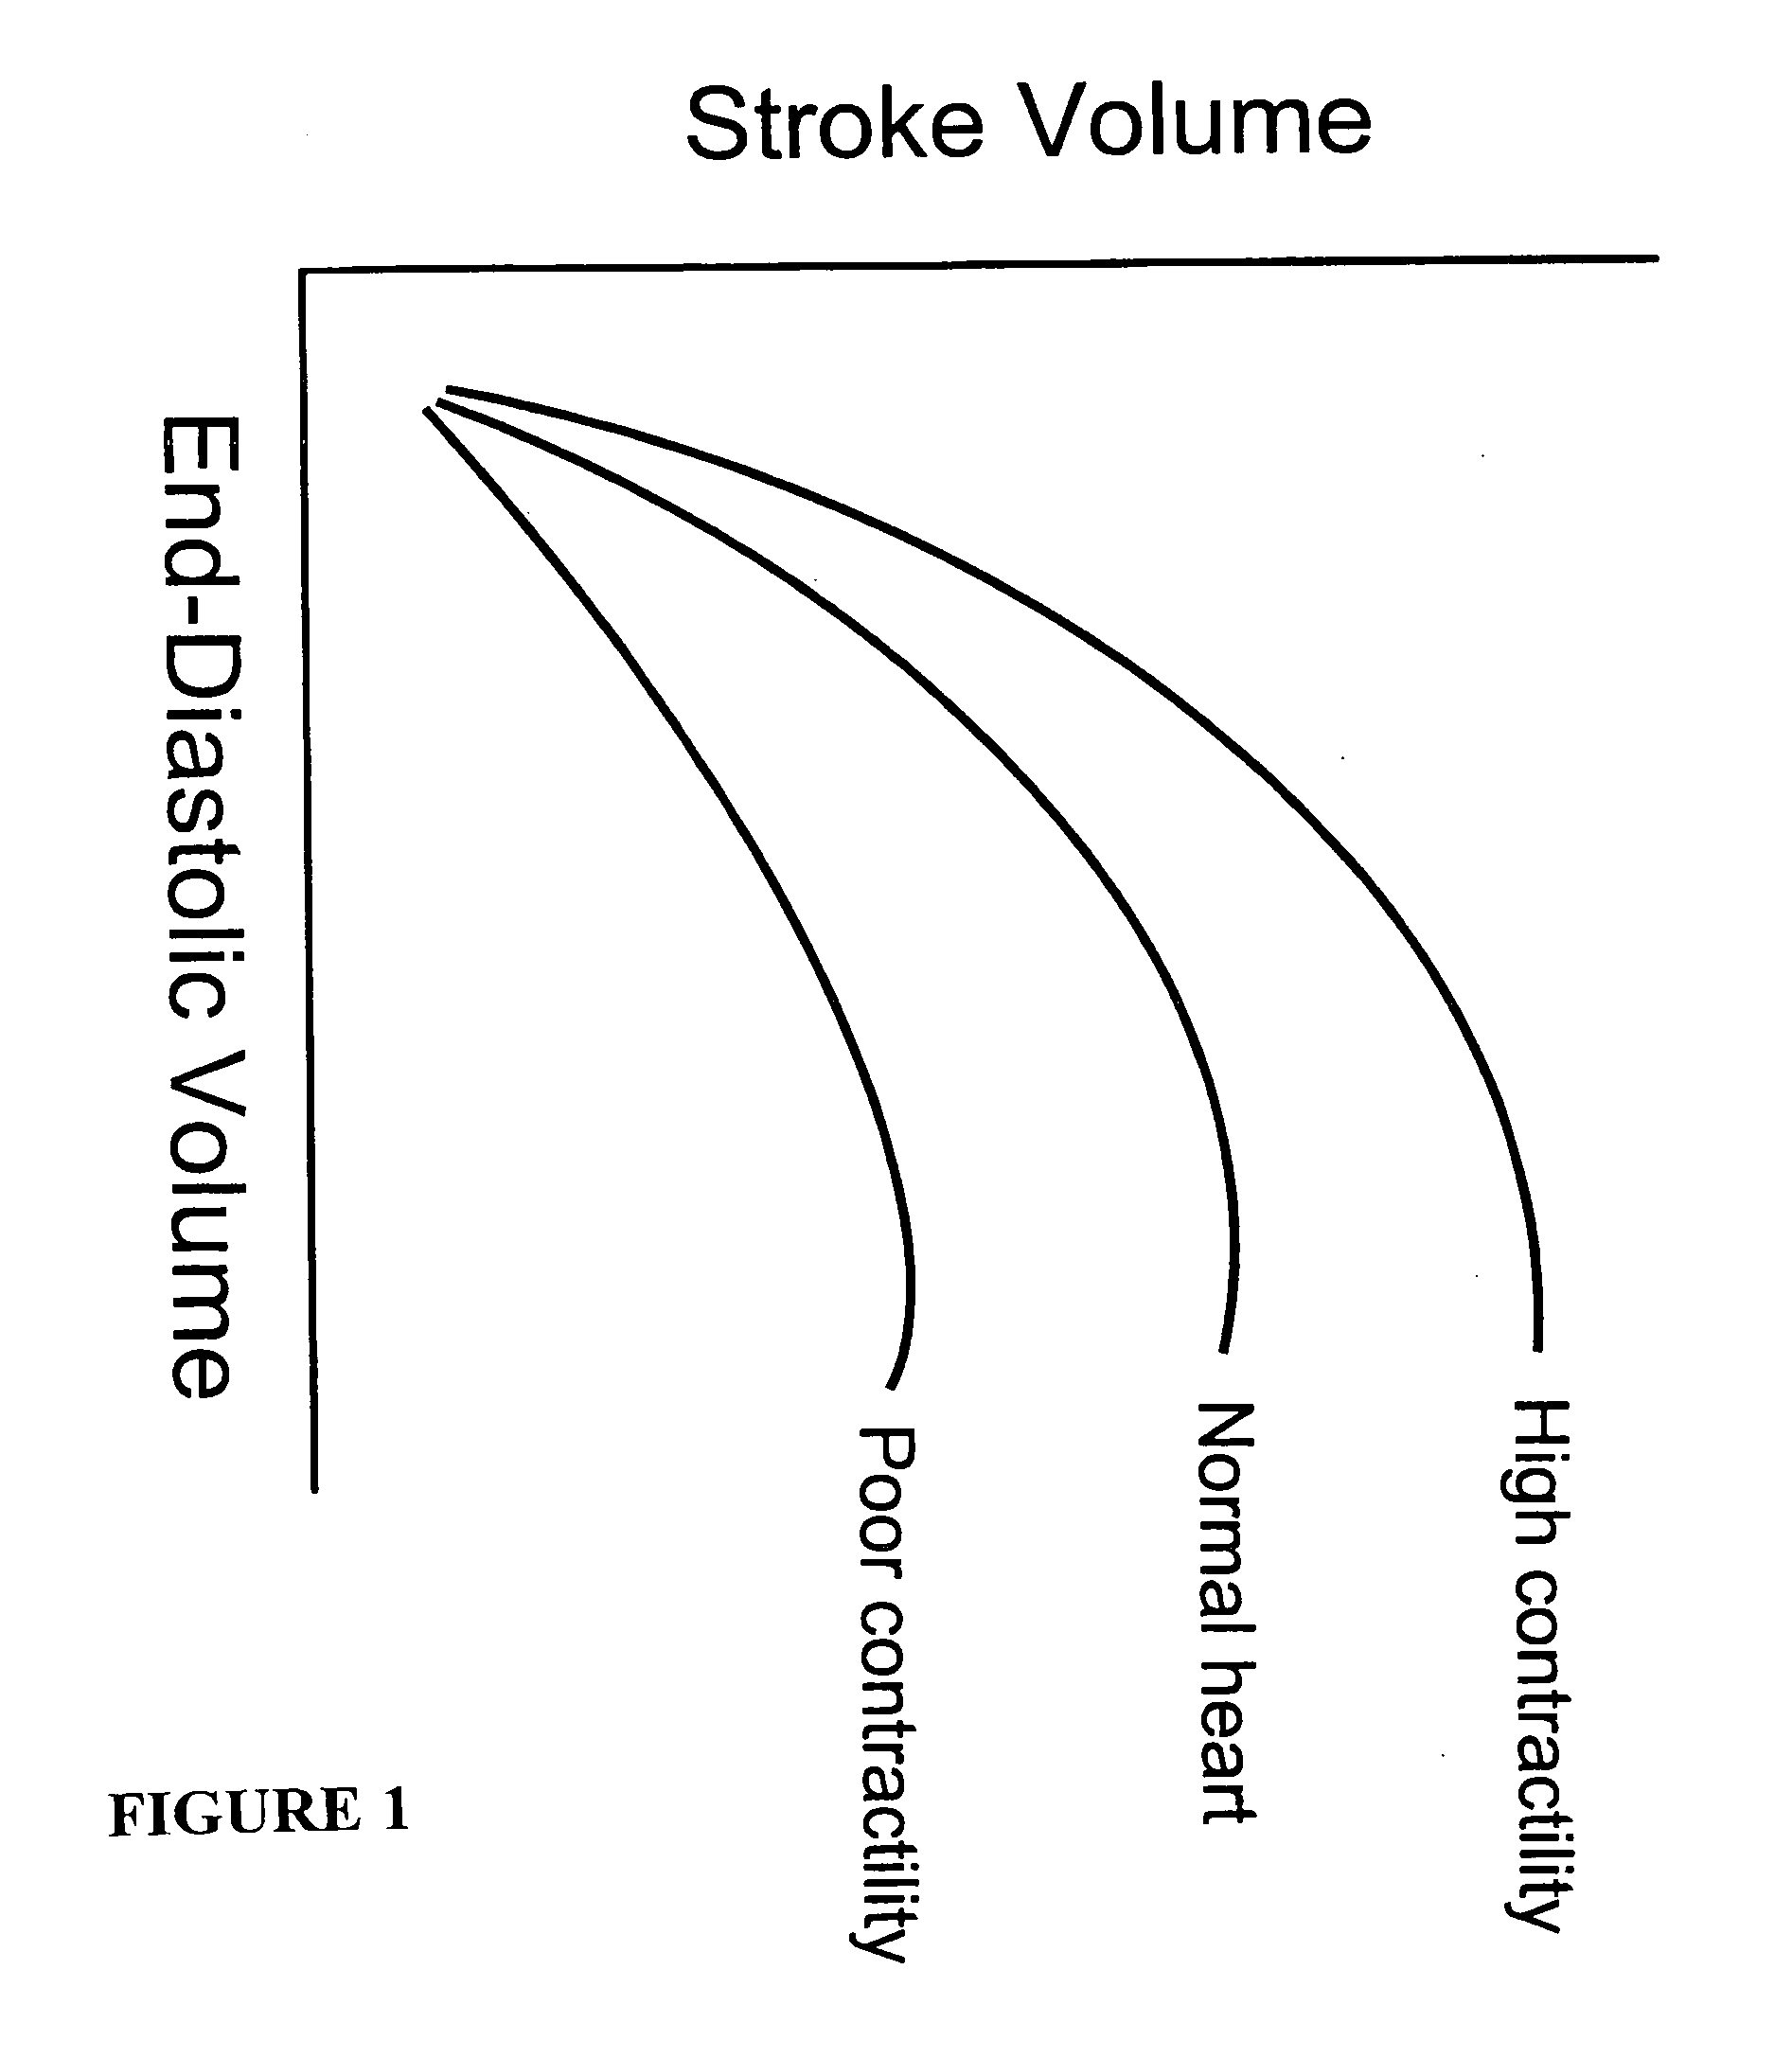 Systems and methods for making noninvasive assessments of cardiac tissue and parameters